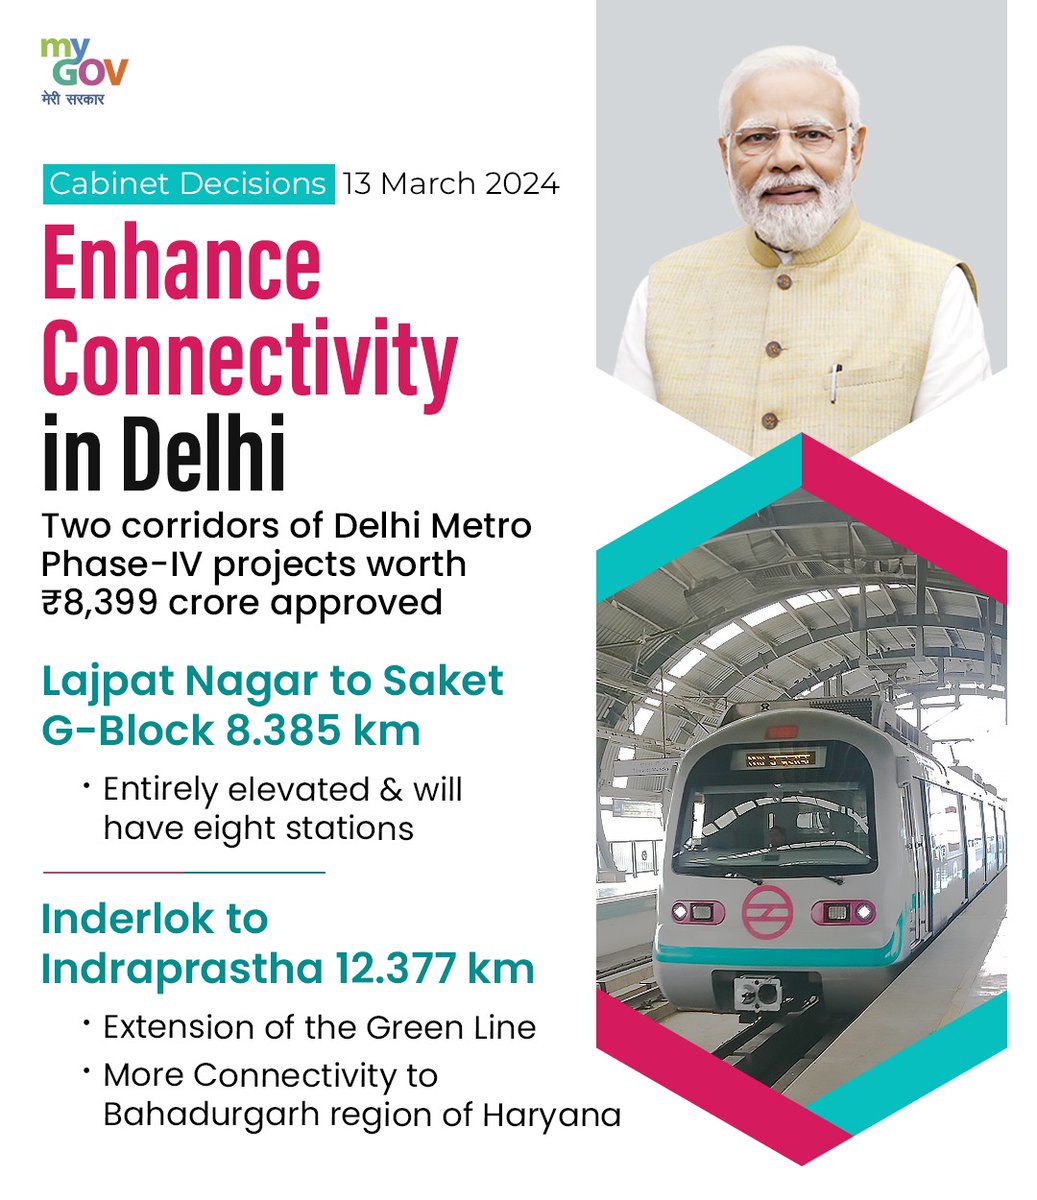 Delhi! Your commute just got easier as the Cabinet has approved two new Metro corridors in Phase-IV: Lajpat Nagar to Saket G-Block and the Green Line extension to Bahadurgarh. 

#DelhiMetro #DMRC #CabinetDecisions